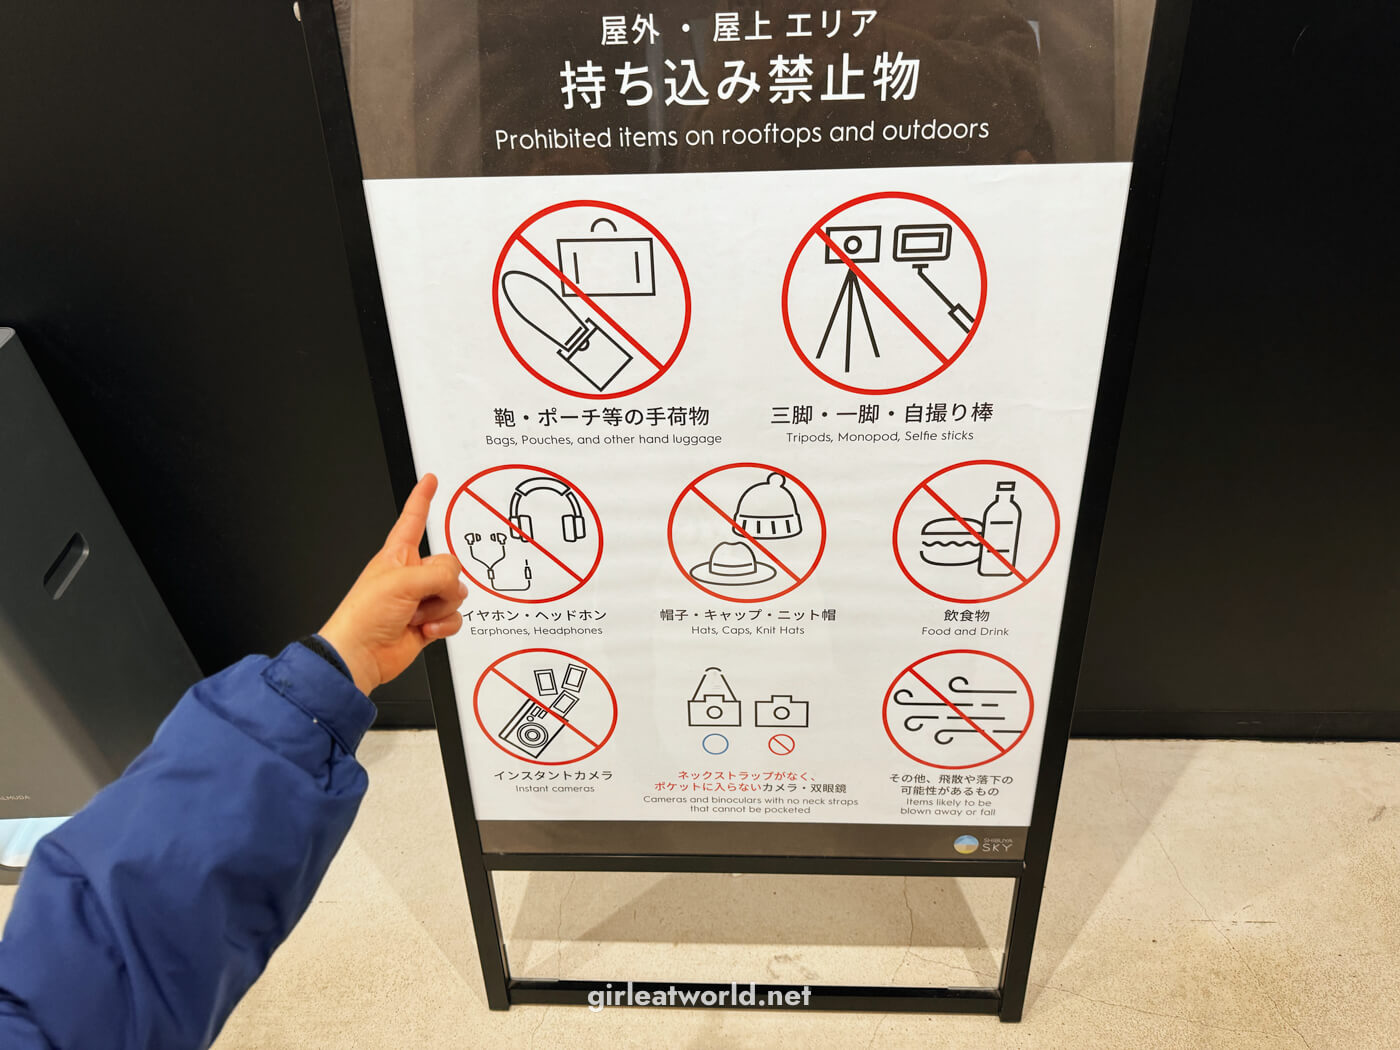 List of forbidden items to bring to the rooftop of Shibuya Sky